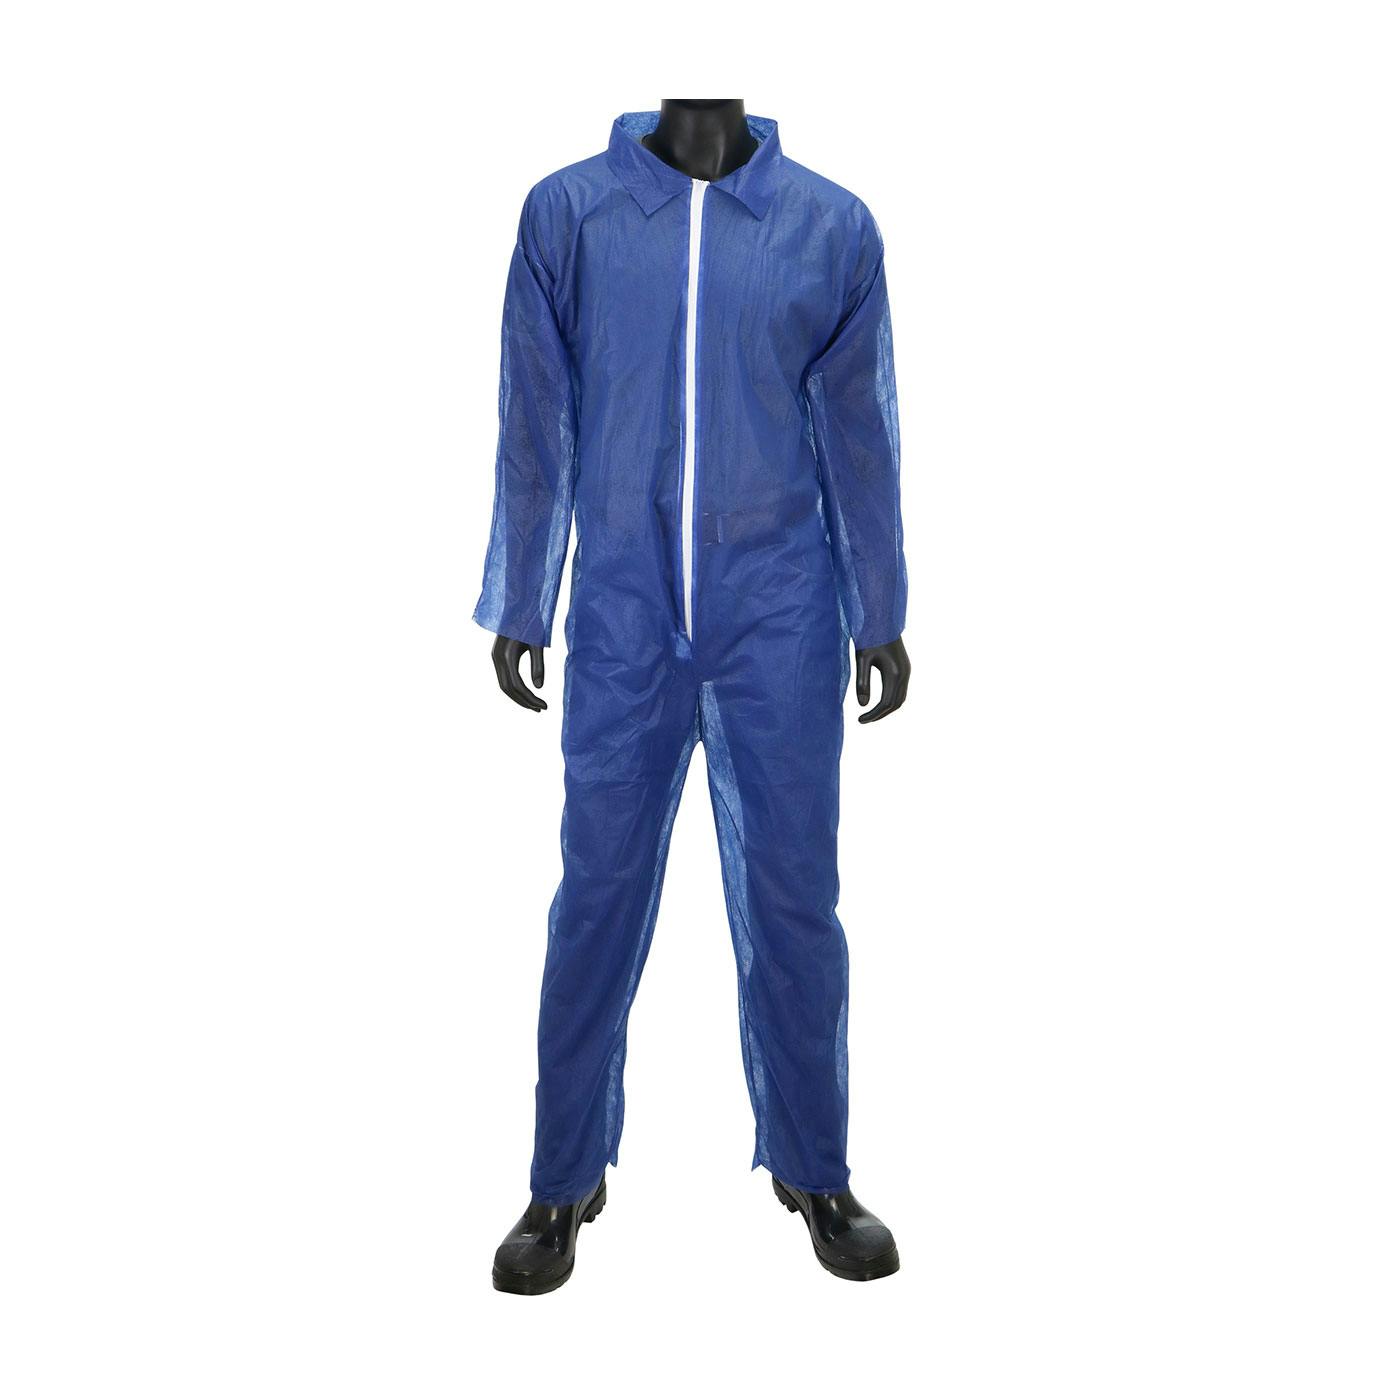 SBP Navy Basic Coverall 20GSM, Blue (3575)